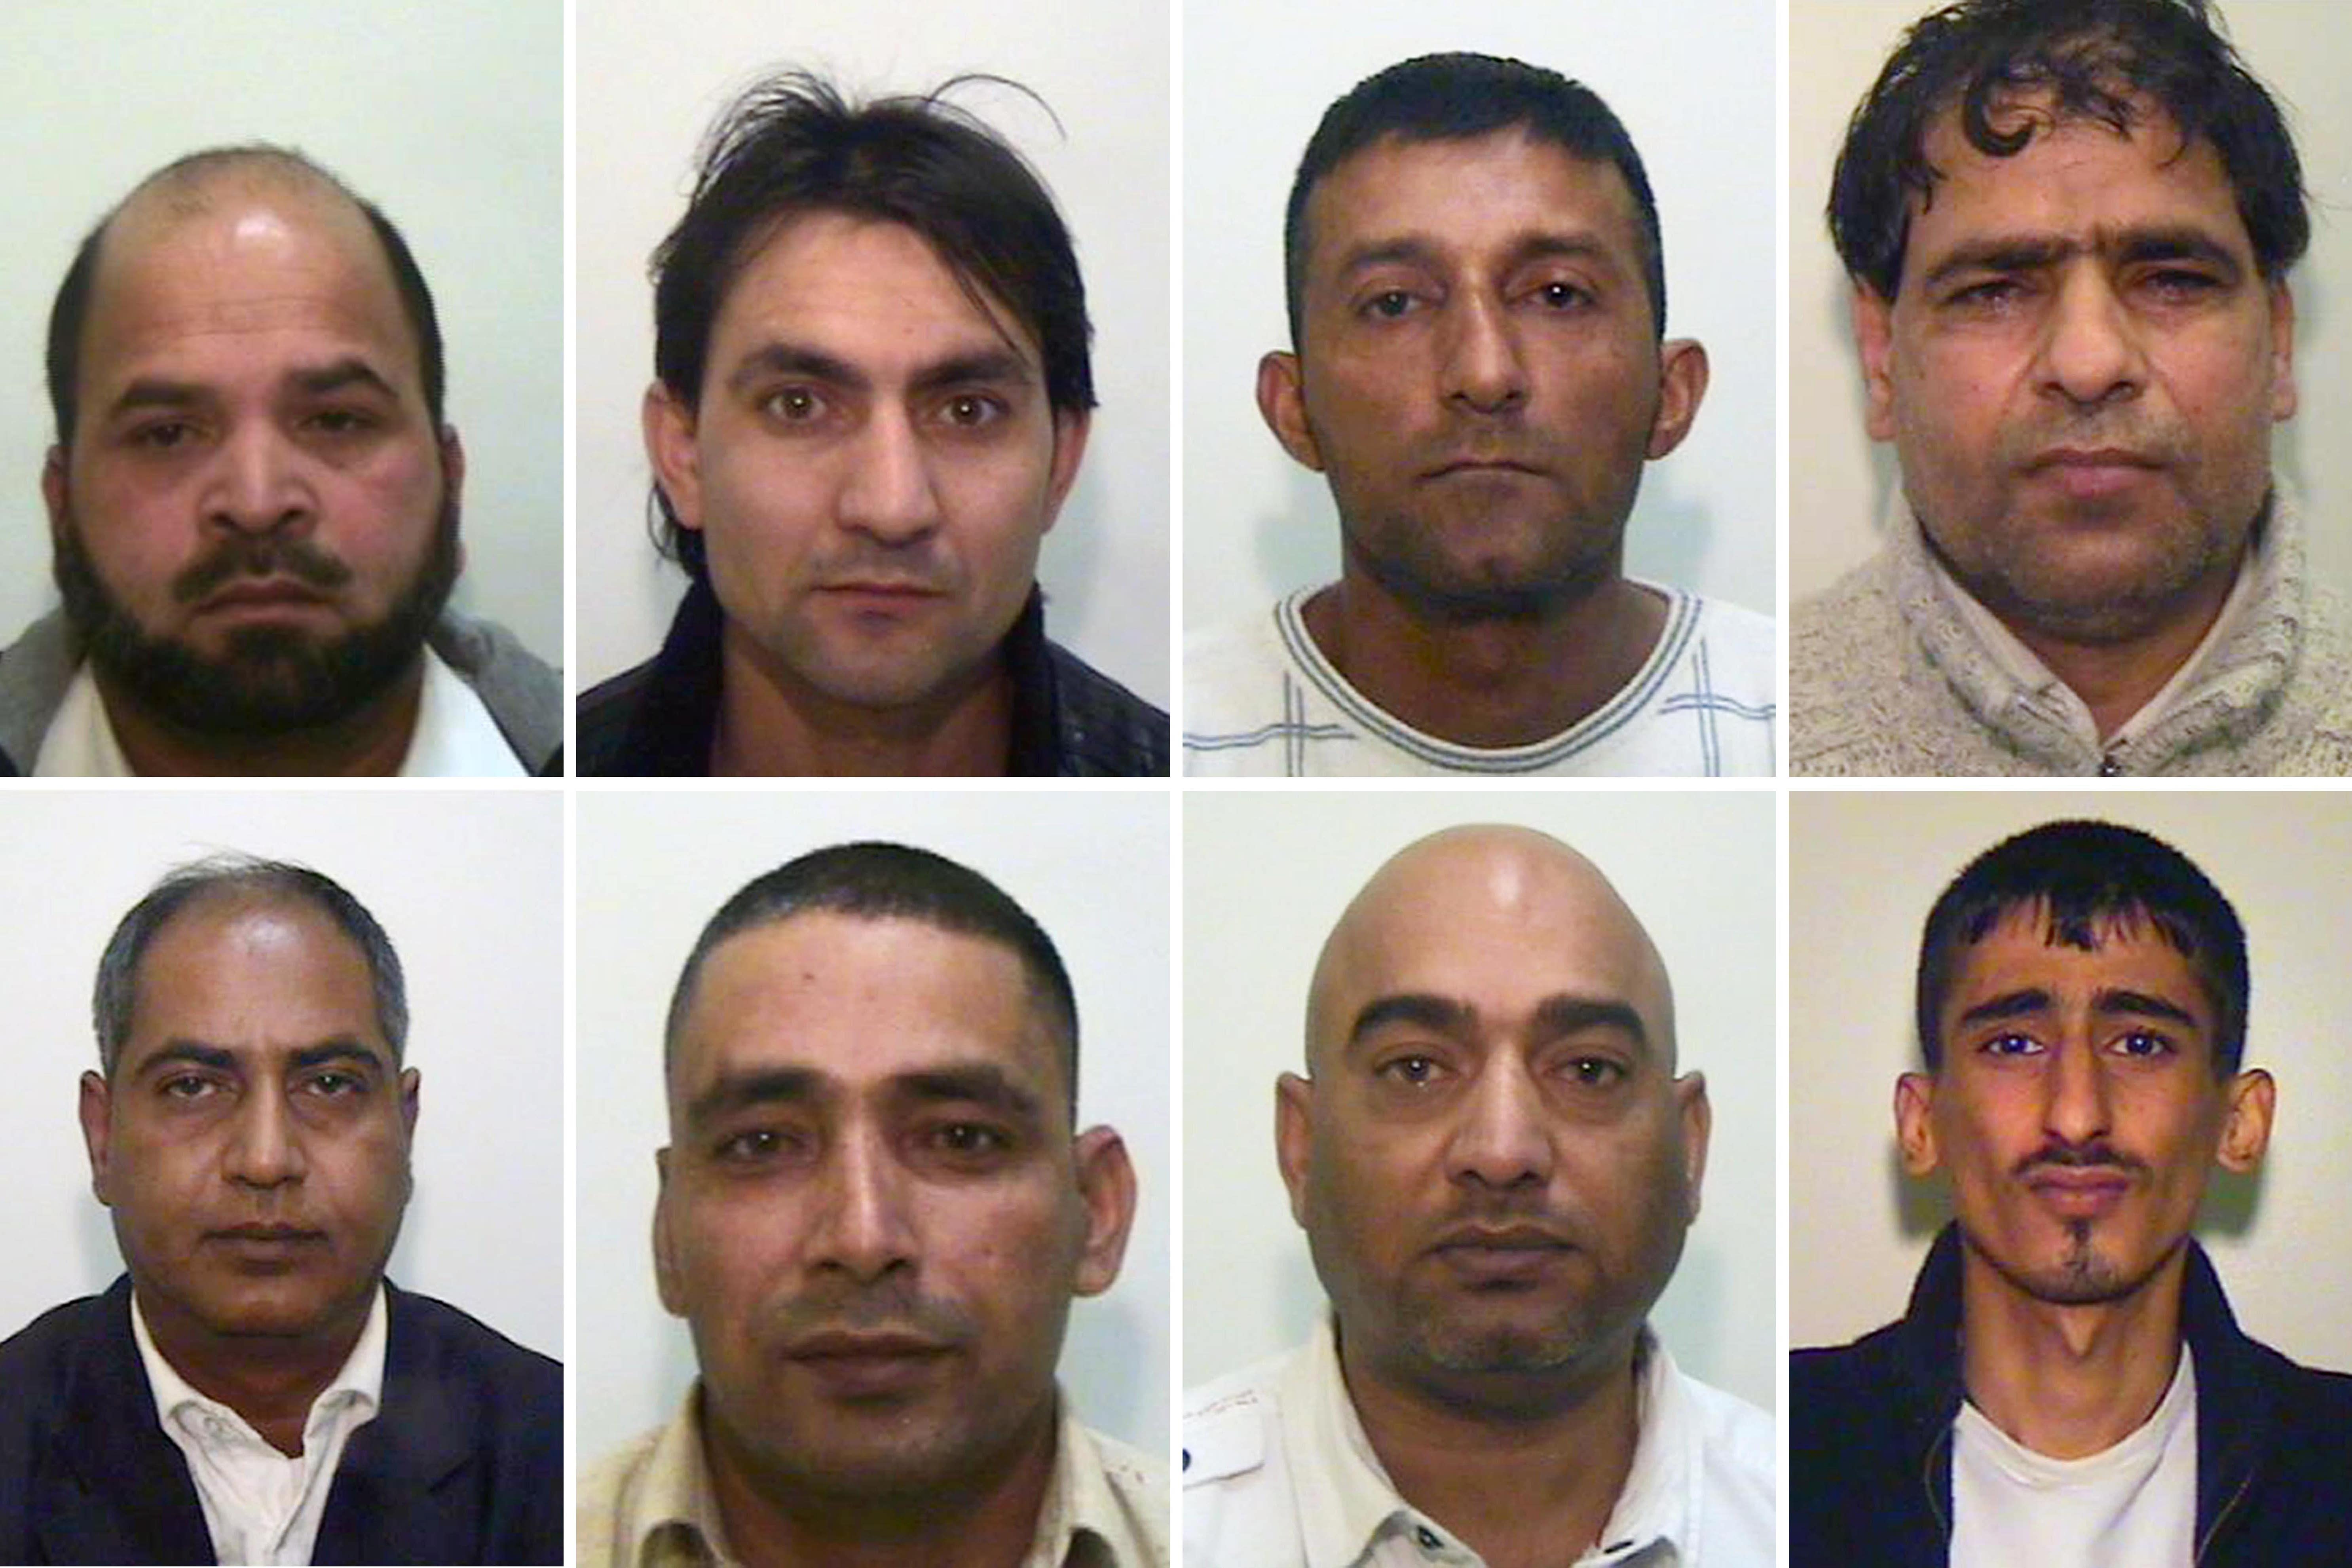 Left to right top: Abdul Rauf, Hamid Safi, Mohammed Sajid and Abdul Aziz. Left to right bottom: Abdul Qayyum, Adil Khan, Mohammed Amin and Kabeer Hassan. All were found guilty of conspiracy and rape